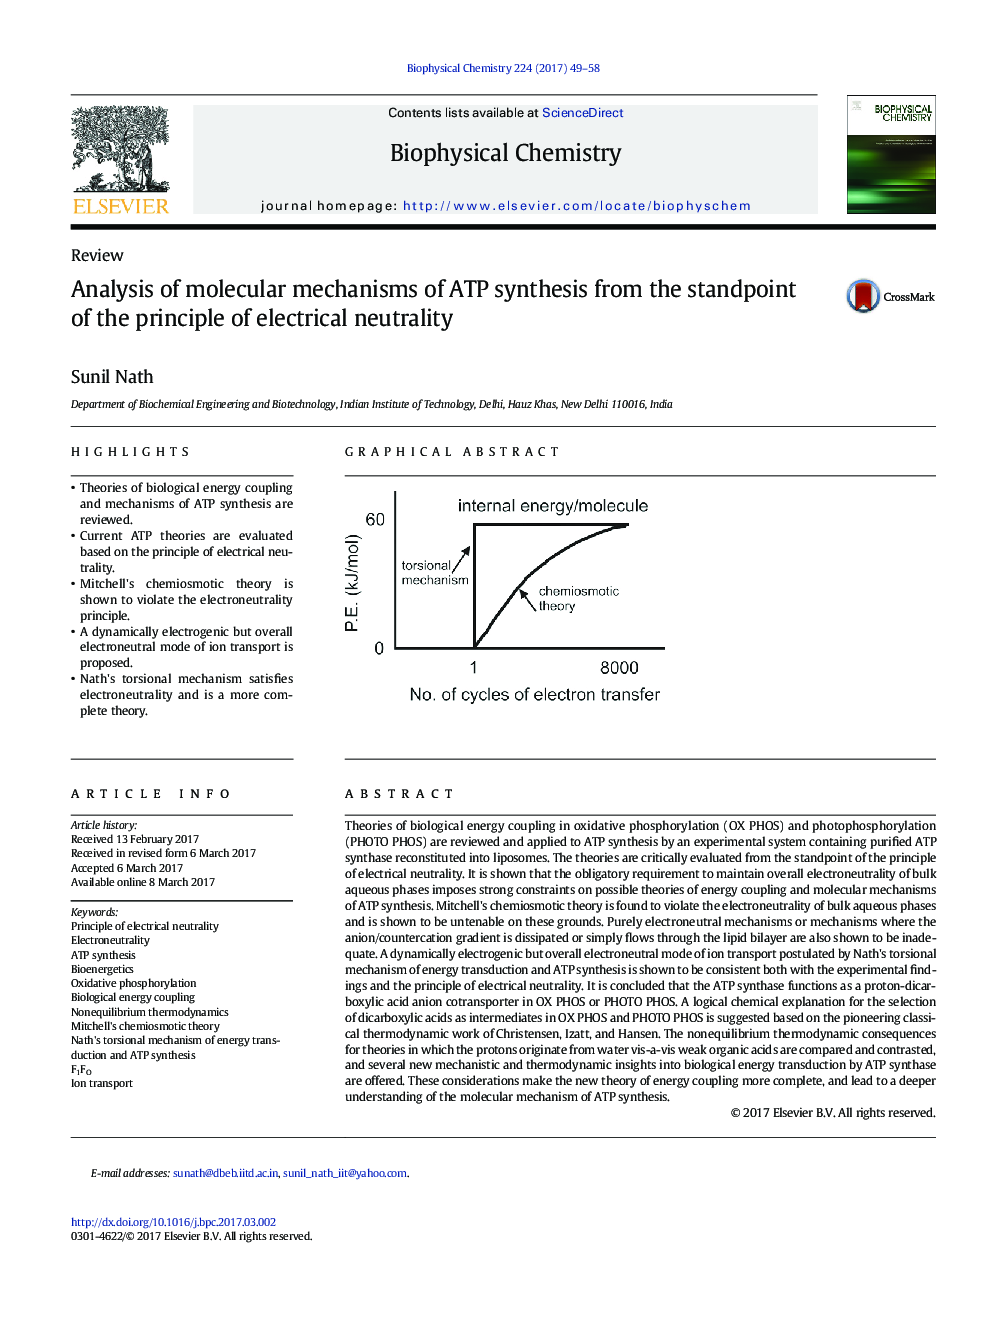 Analysis of molecular mechanisms of ATP synthesis from the standpoint of the principle of electrical neutrality